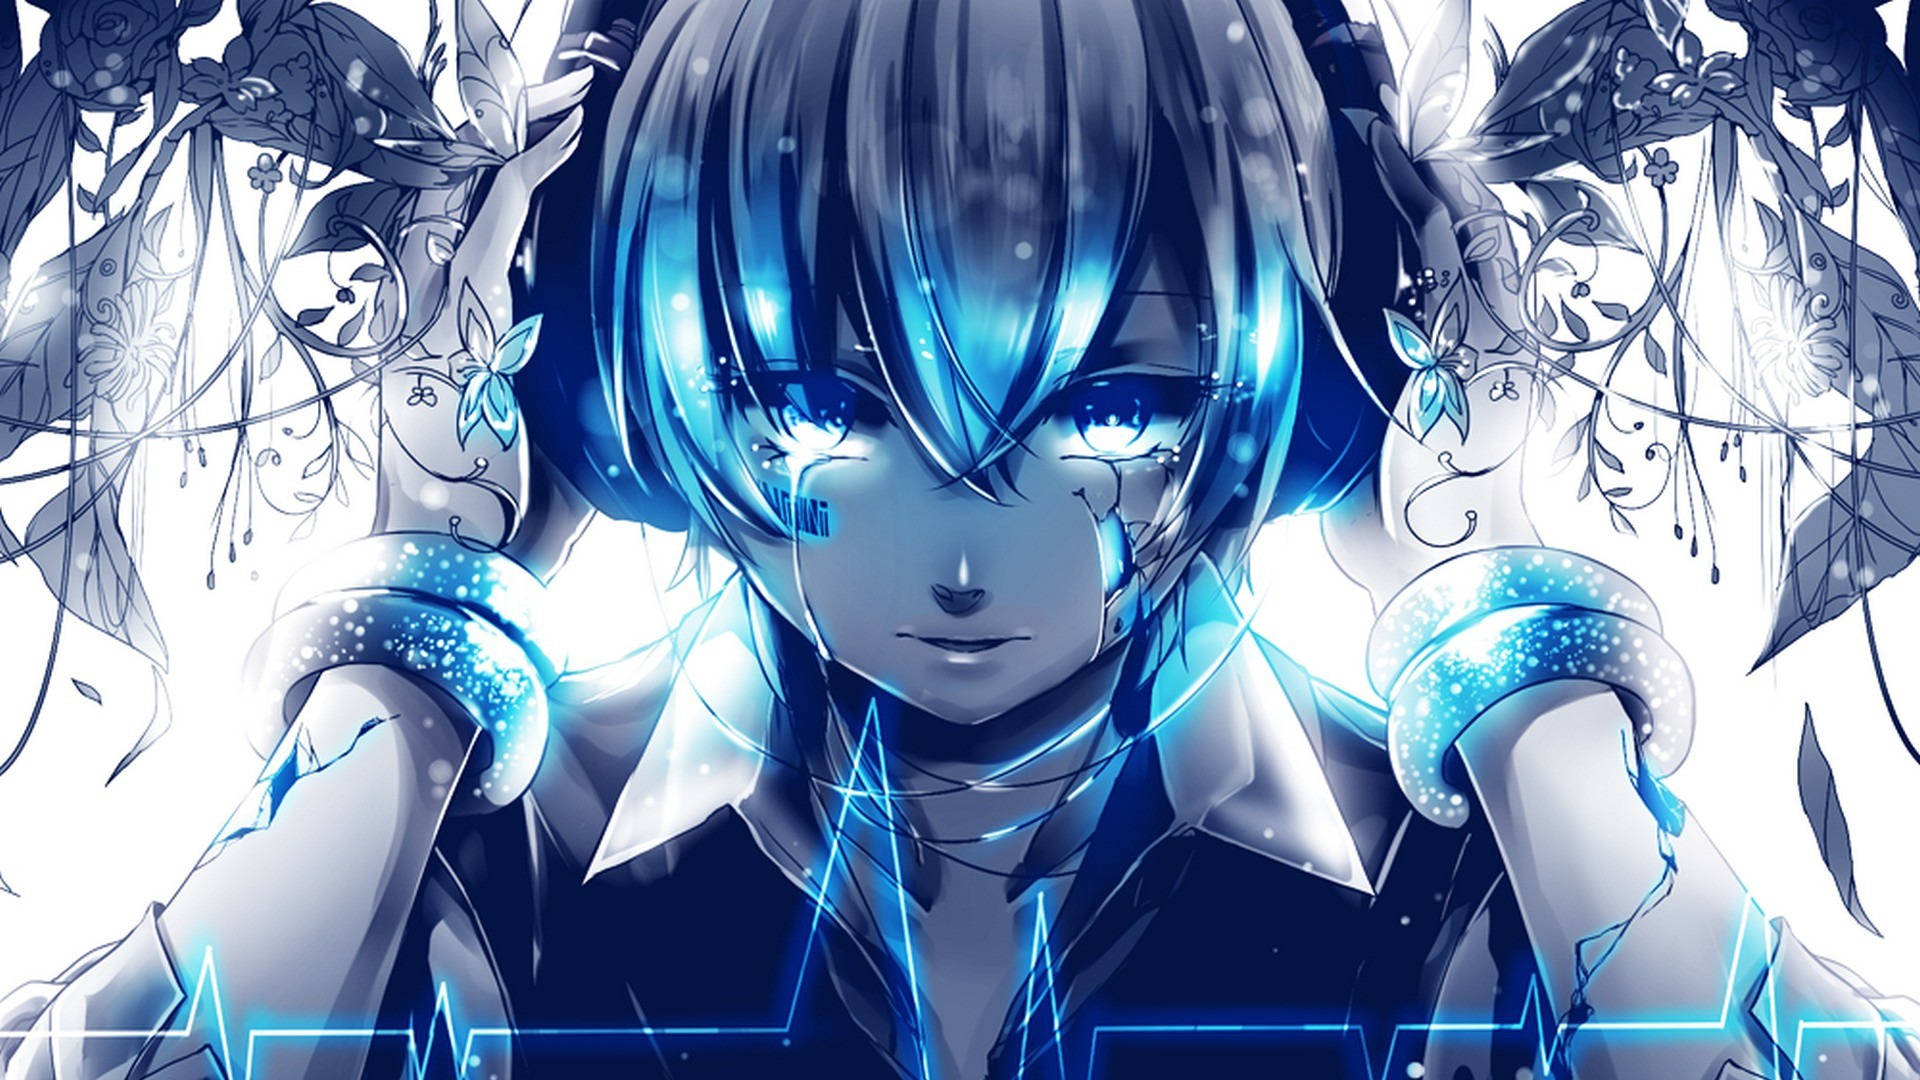 1920x1080 full hd 1080p vocaloid wallpapers desktop images windows 10 backgrounds  download wallpapers hi res quality images computer wallpapers colours  artwork ...